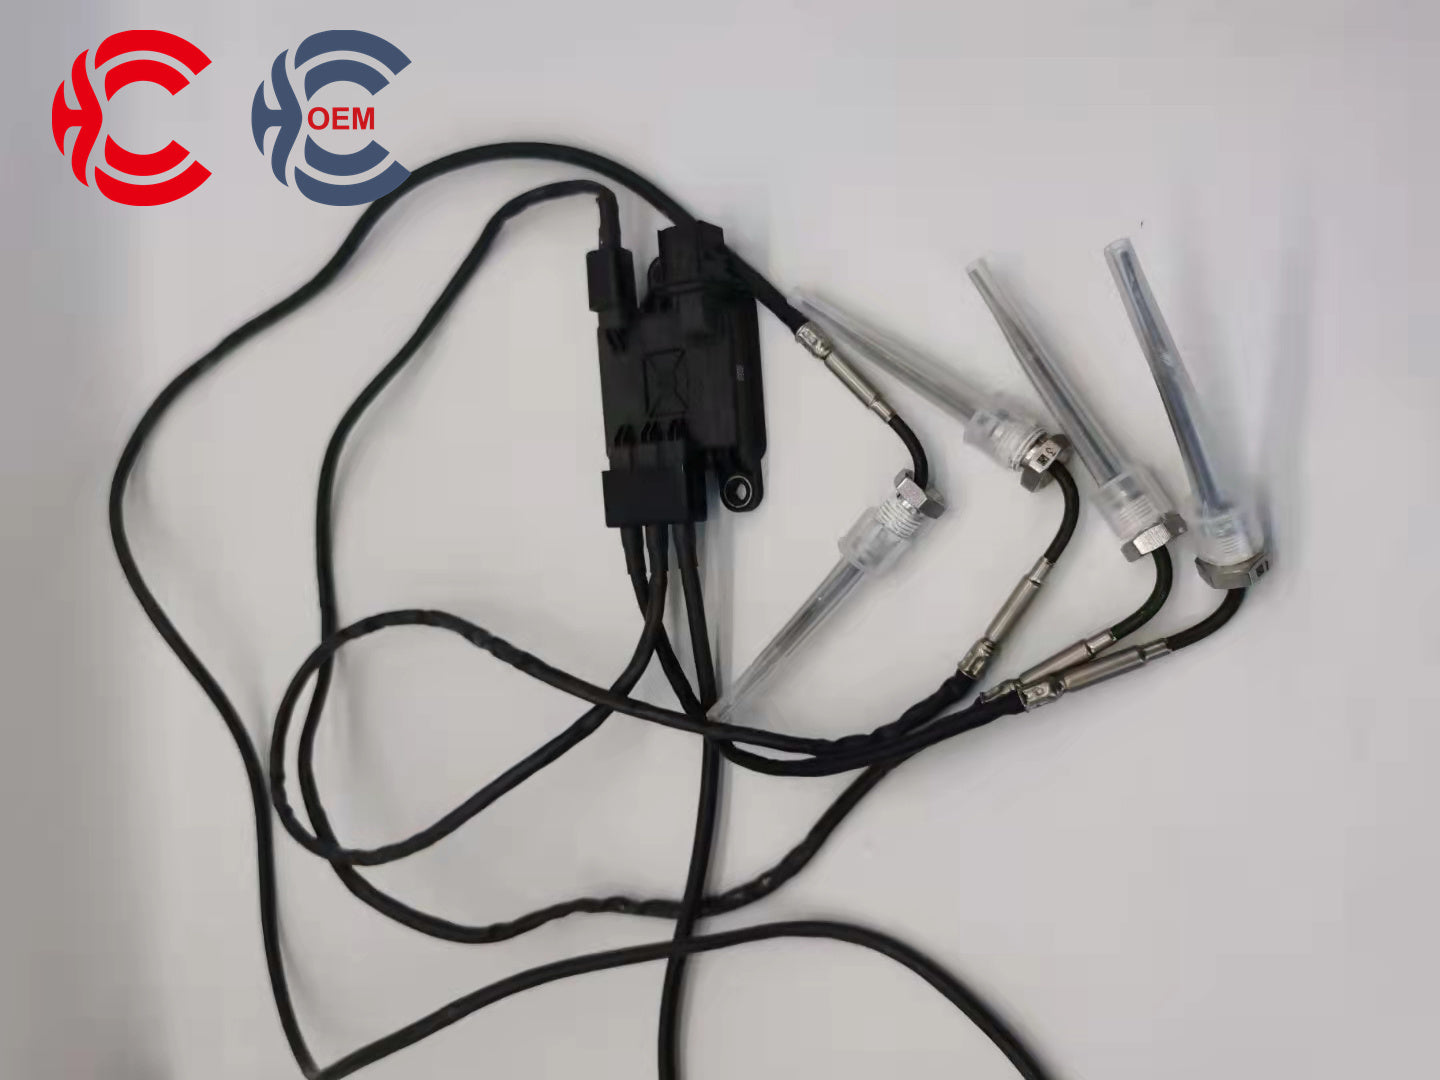 OEM: TS0600 A064H000 CUMMINSMaterial: MetalColor: SilverOrigin: Made in ChinaWeight: 200gPacking List: 1* Exhaust Gas Temperature Sensor More ServiceWe can provide OEM Manufacturing serviceWe can Be your one-step solution for Auto PartsWe can provide technical scheme for you Feel Free to Contact Us, We will get back to you as soon as possible.